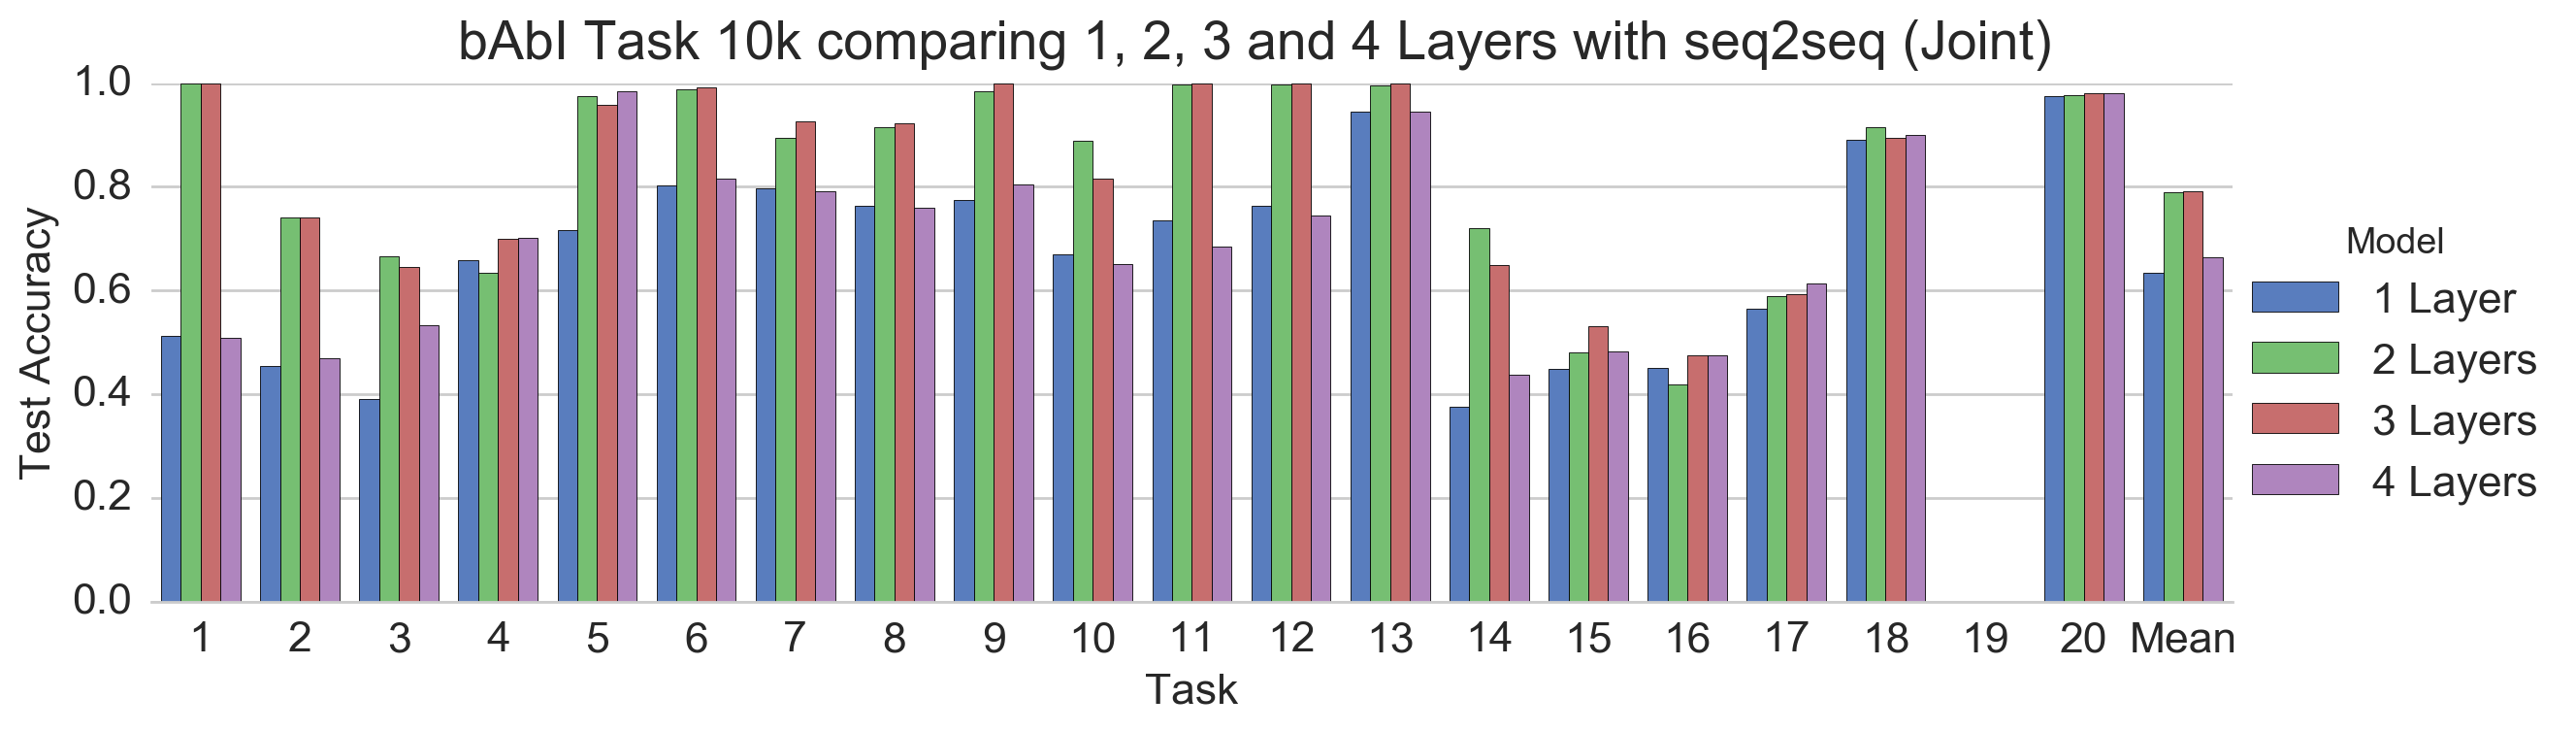 bAbI Task 10k comparing 1, 2, 3 and 4 Layers with seq2seq (Joint)